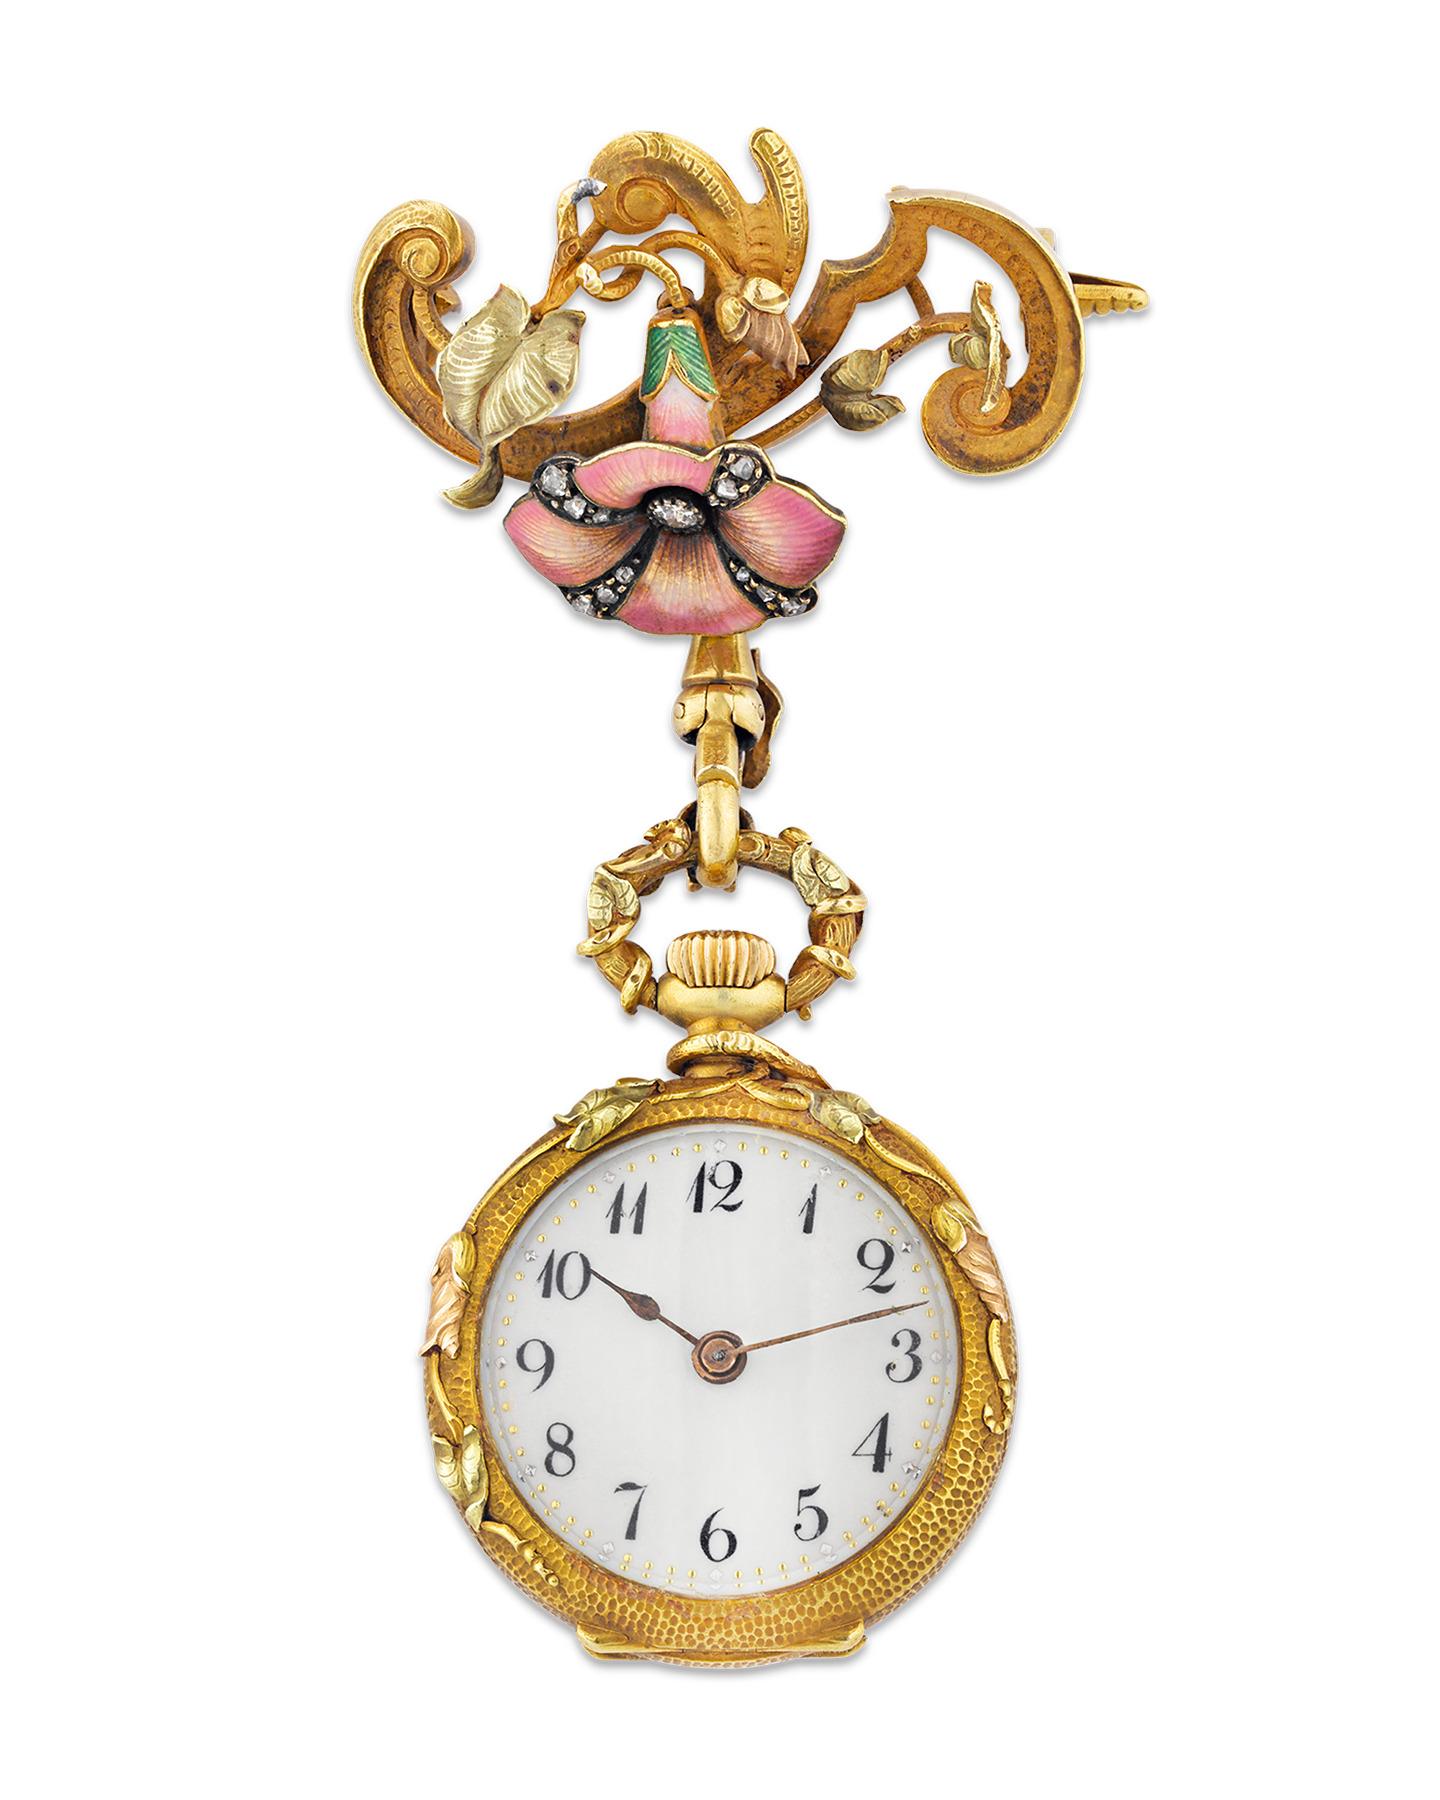 This beautiful French watch pendant features a sublime, organic floral motif indicative of Art Nouveau jewelry design. Crafted of 18K gold, this elegant timepiece is enveloped in graceful angel trumpets adorned with diamonds and brilliant pink and